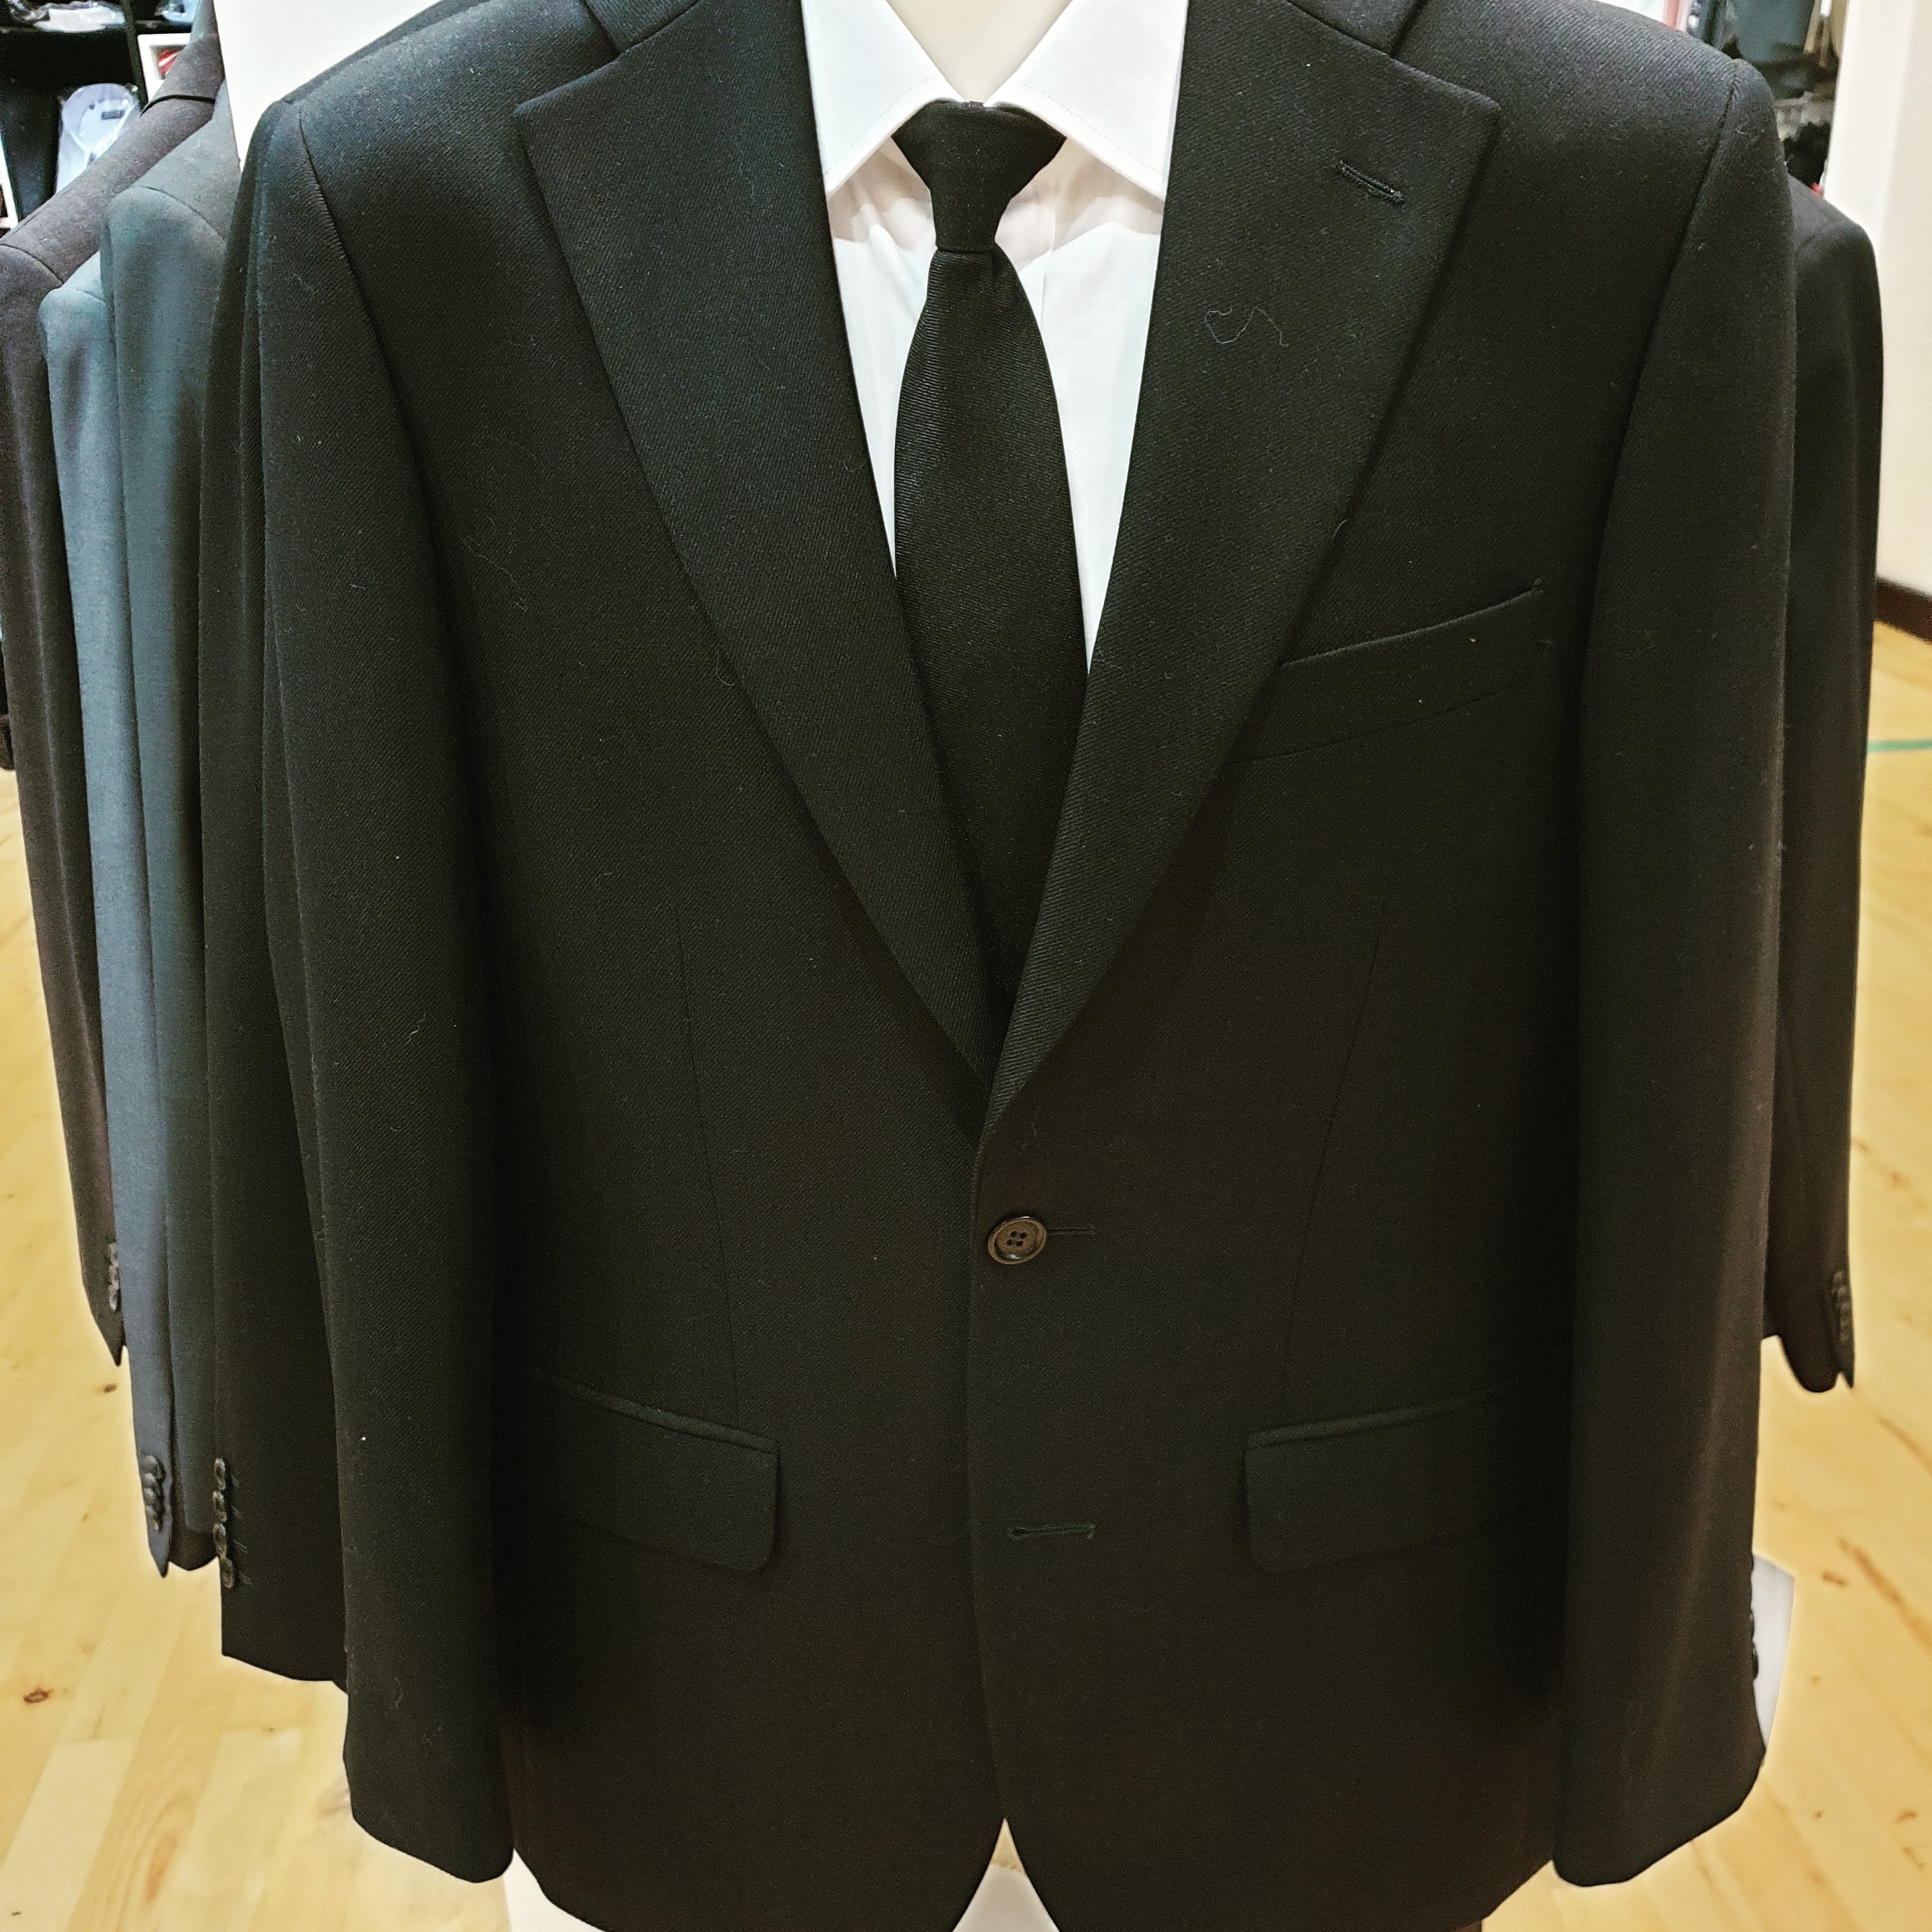 Funeral suit hire – ItSuitsCork